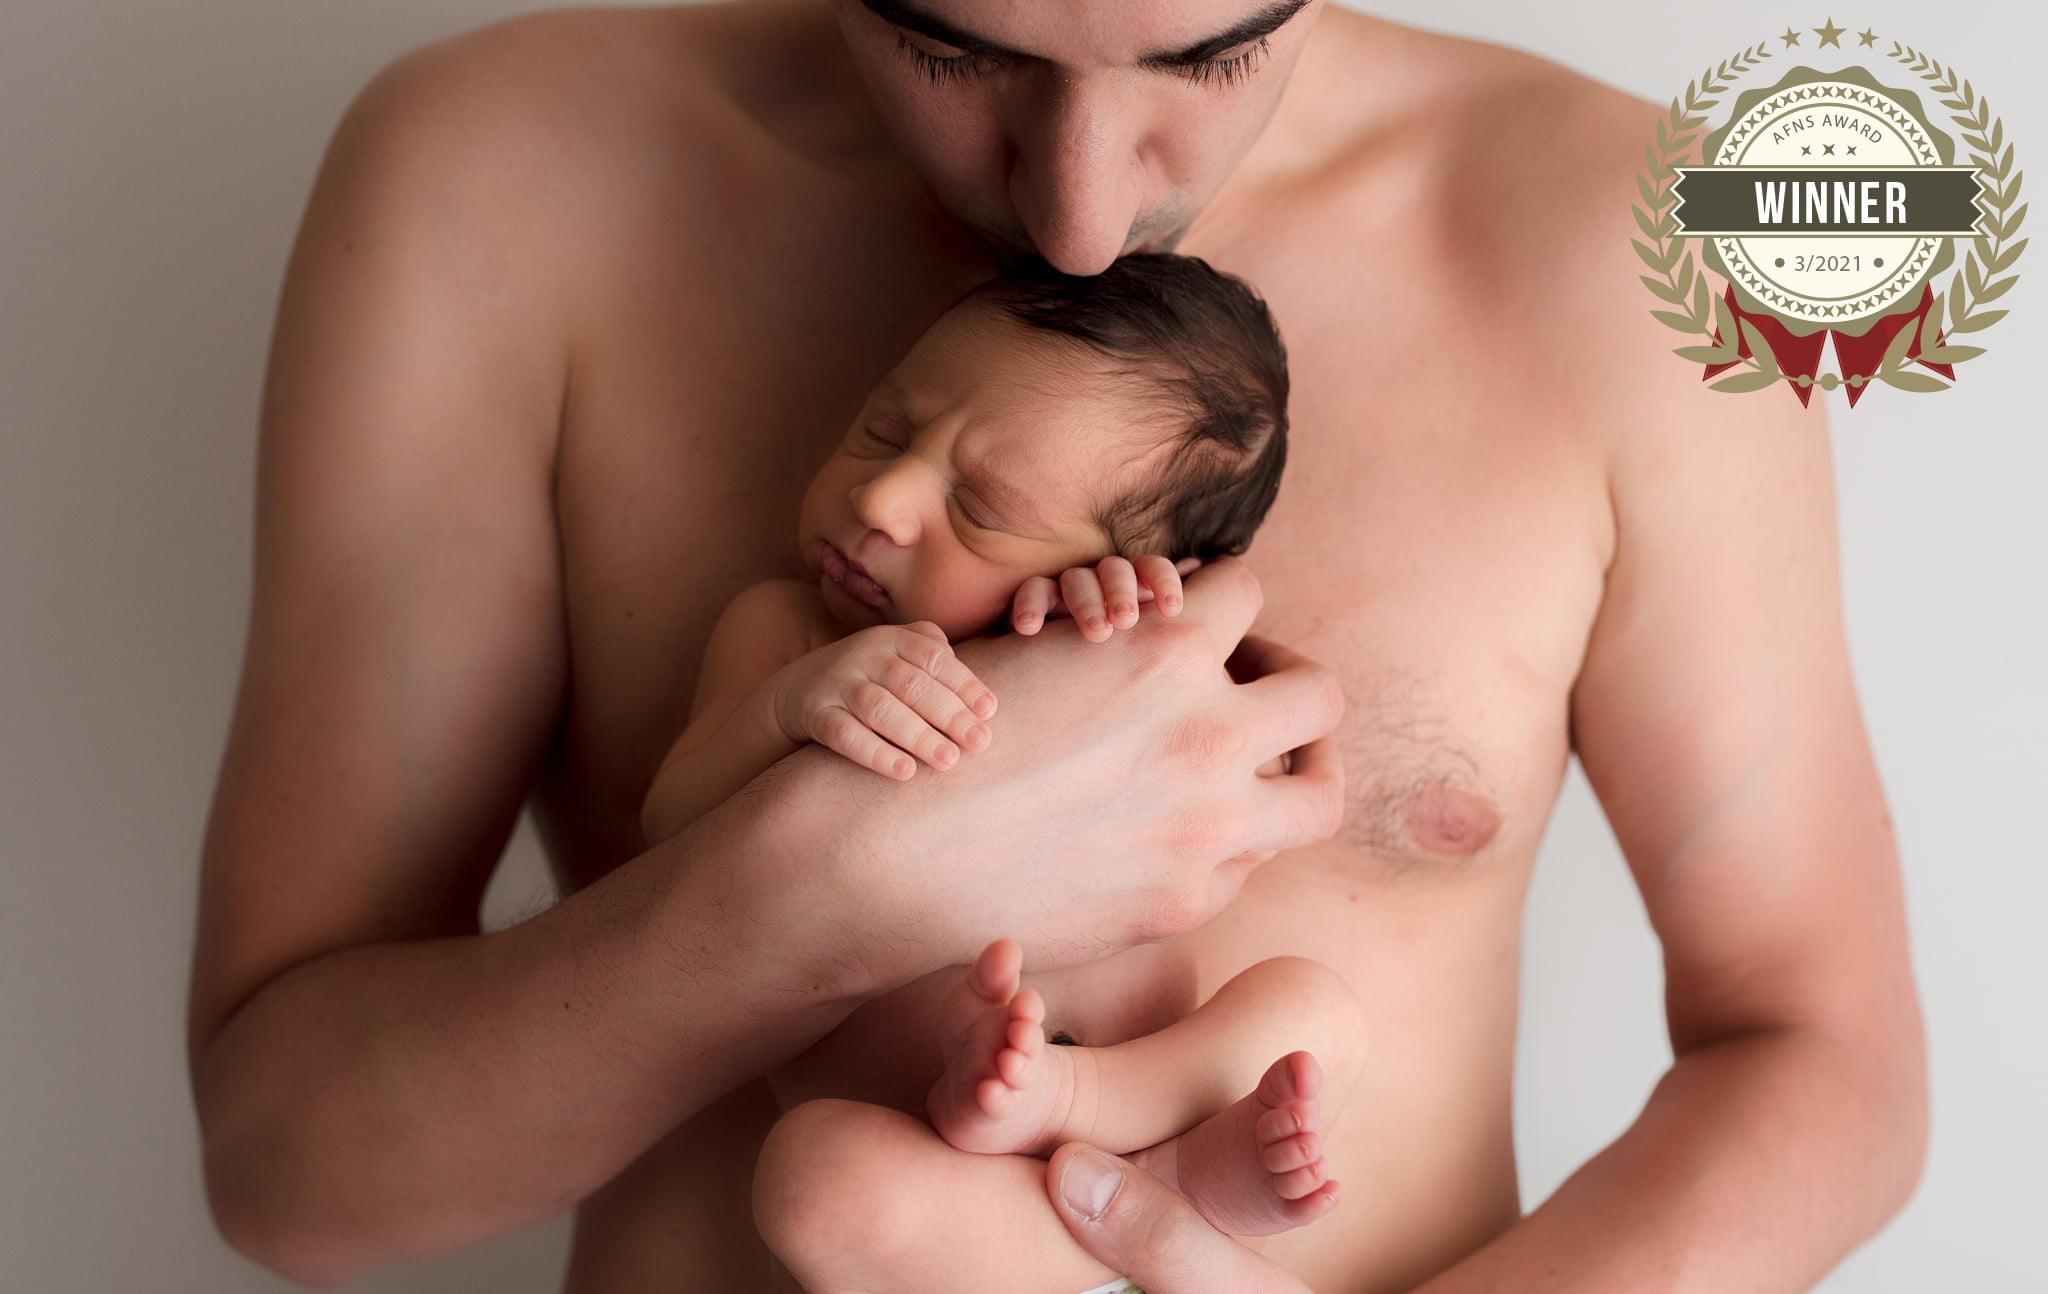 Shirtless dad holding newborn and kissing him on the head with award badge on top right.